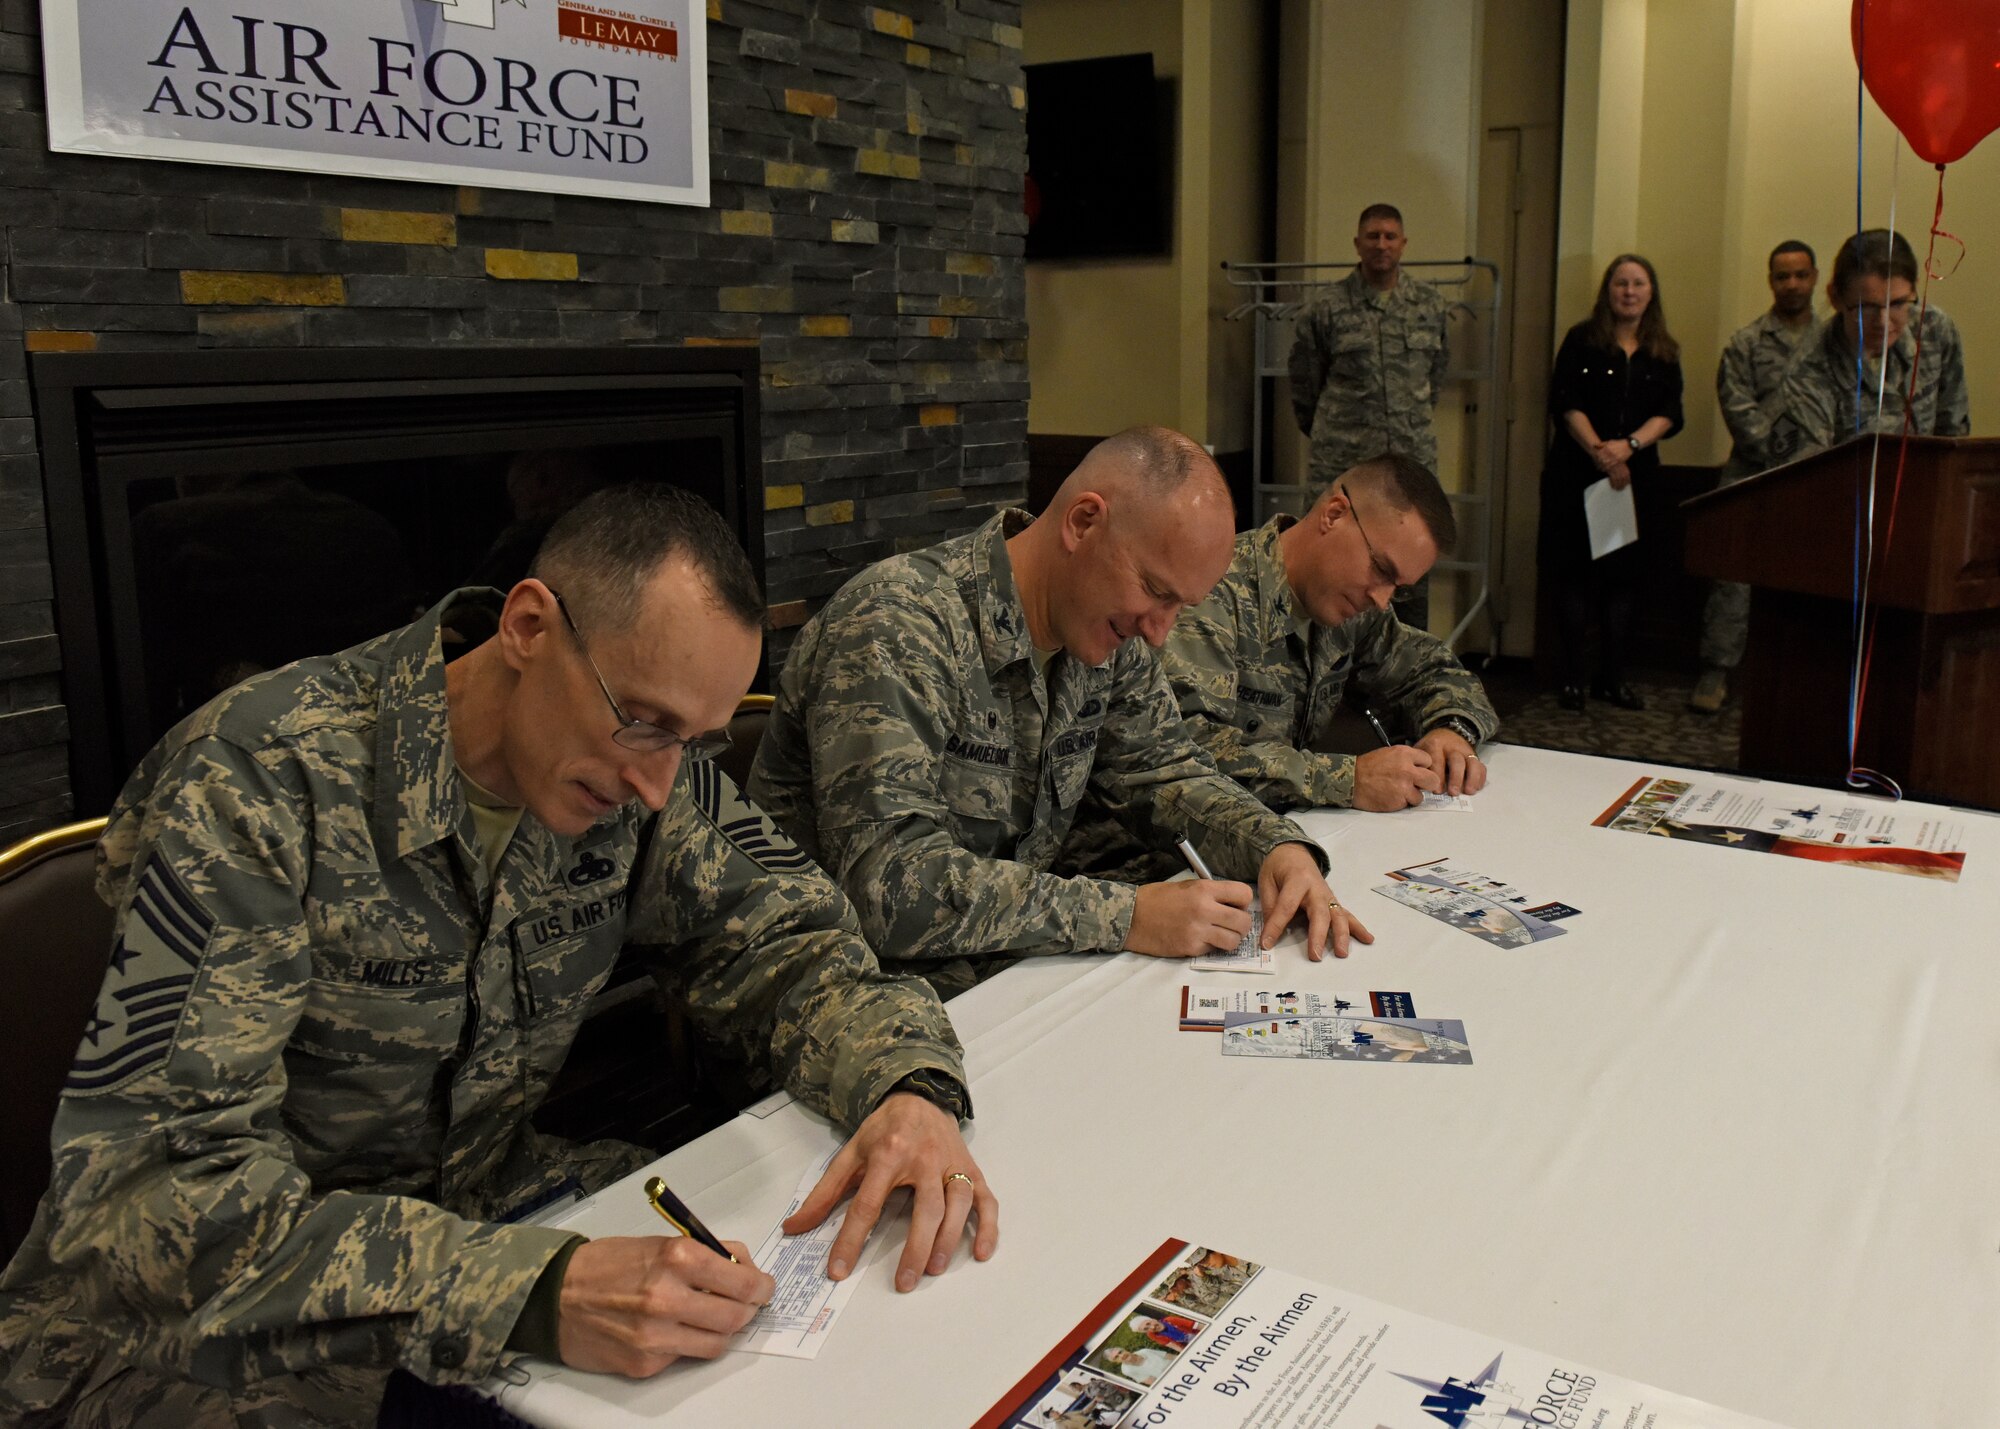 (from left) Chief Master Sgt. Lee Mills, 92nd Air Refueling Wing command chief, Col. Ryan Samuelson, 92nd ARW commander, and Col. J. Scot Heathman, 92nd ARW vice commander, make the first donations during the Air Force Assistance Fund kick-off breakfast at Fairchild Air Force Base, Washington, March 26, 2018. The Air Force Aid Society directs the AFAF and works to support and enhance the U.S. Air Force mission by providing emergency financial assistance, education support and community programs to Airmen. (U.S. Air Force photo/Airman 1st Class Jesenia Landaverde)